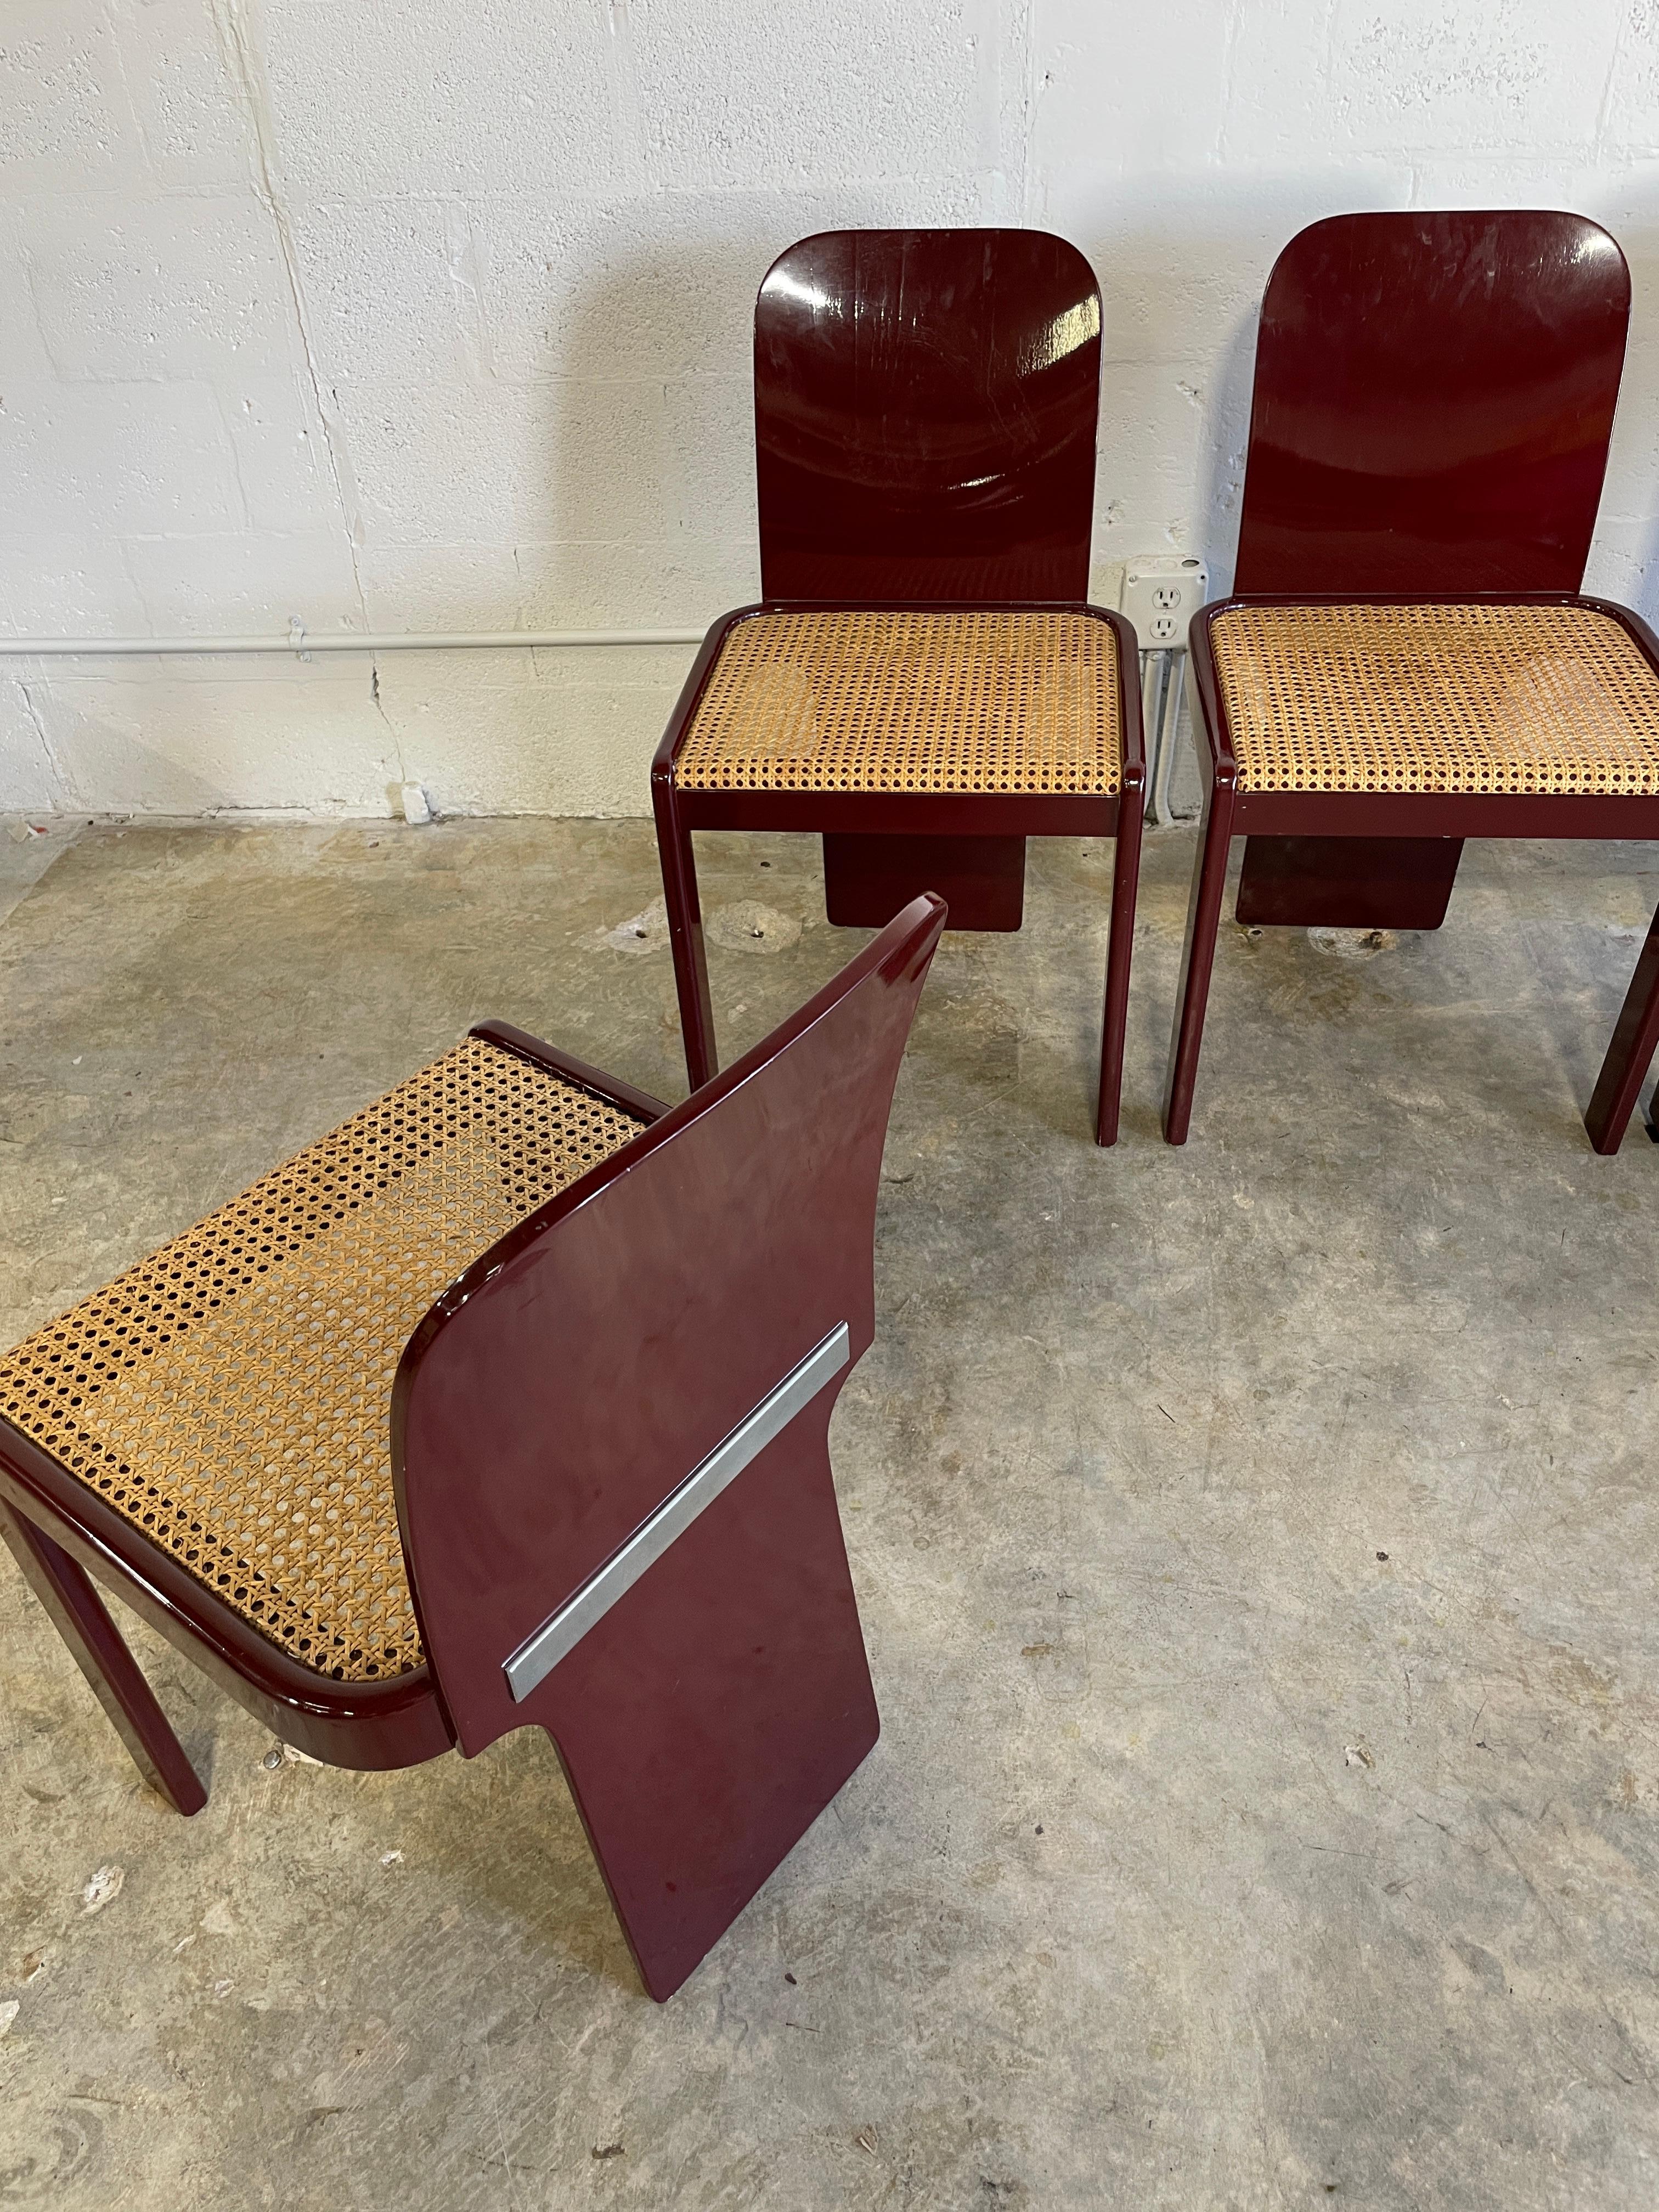 Pierluigi Molinari for Pozzi Italian Mid Century Dining Chairs In Good Condition For Sale In Fort Lauderdale, FL